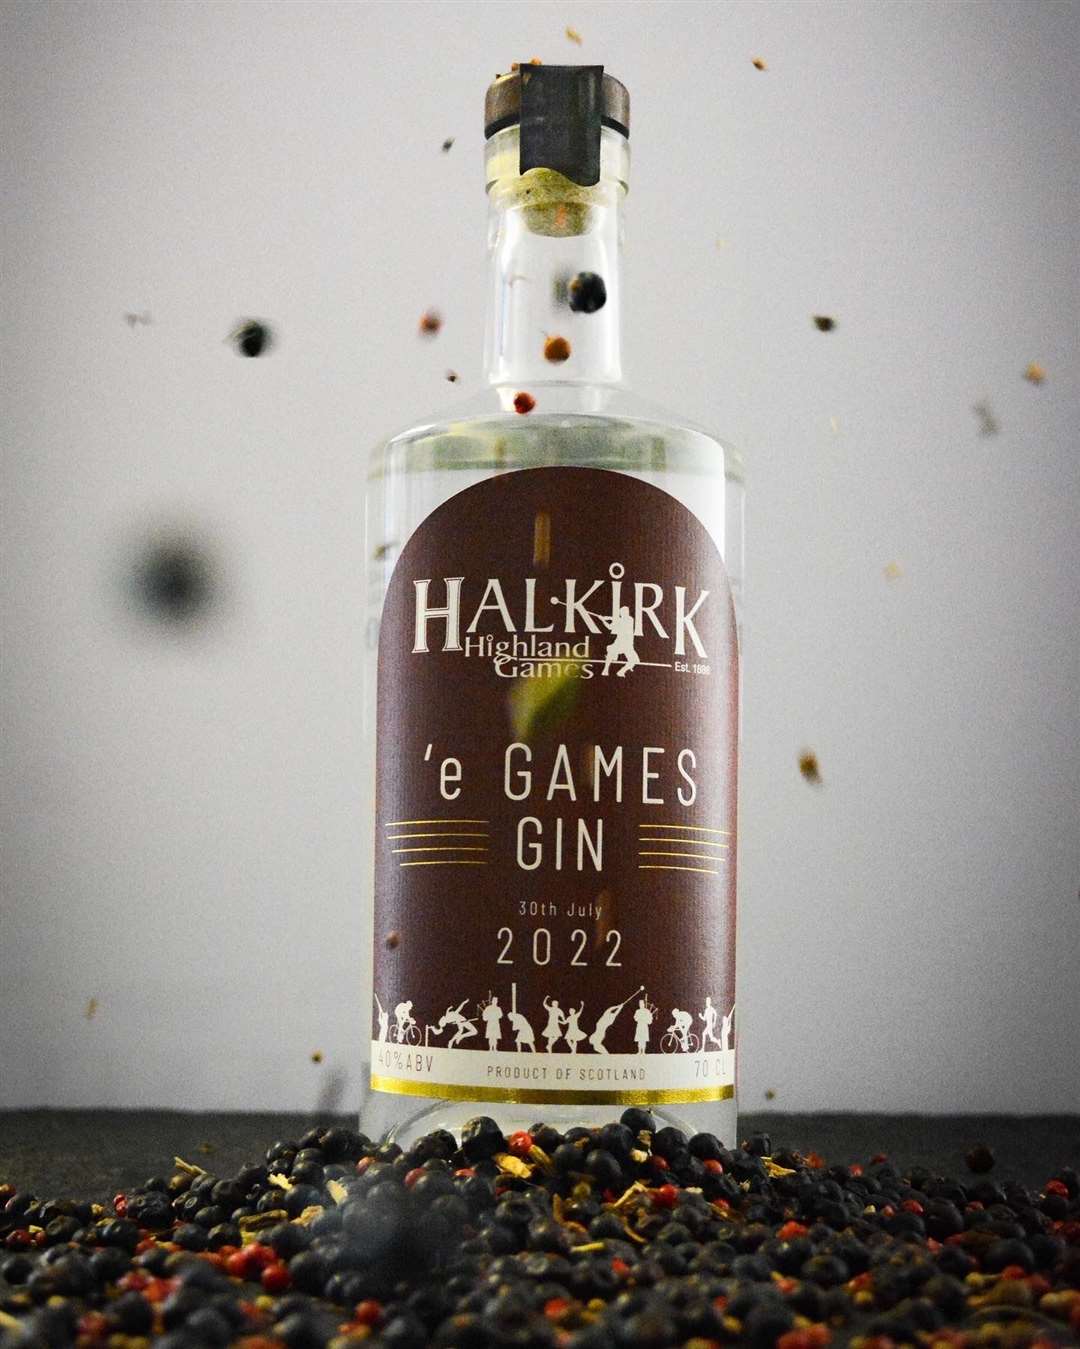 There are 300 individually numbered bottles of ’e Games Gin resulting from a partnership between North Point Distillery and Halkirk Highland Games.